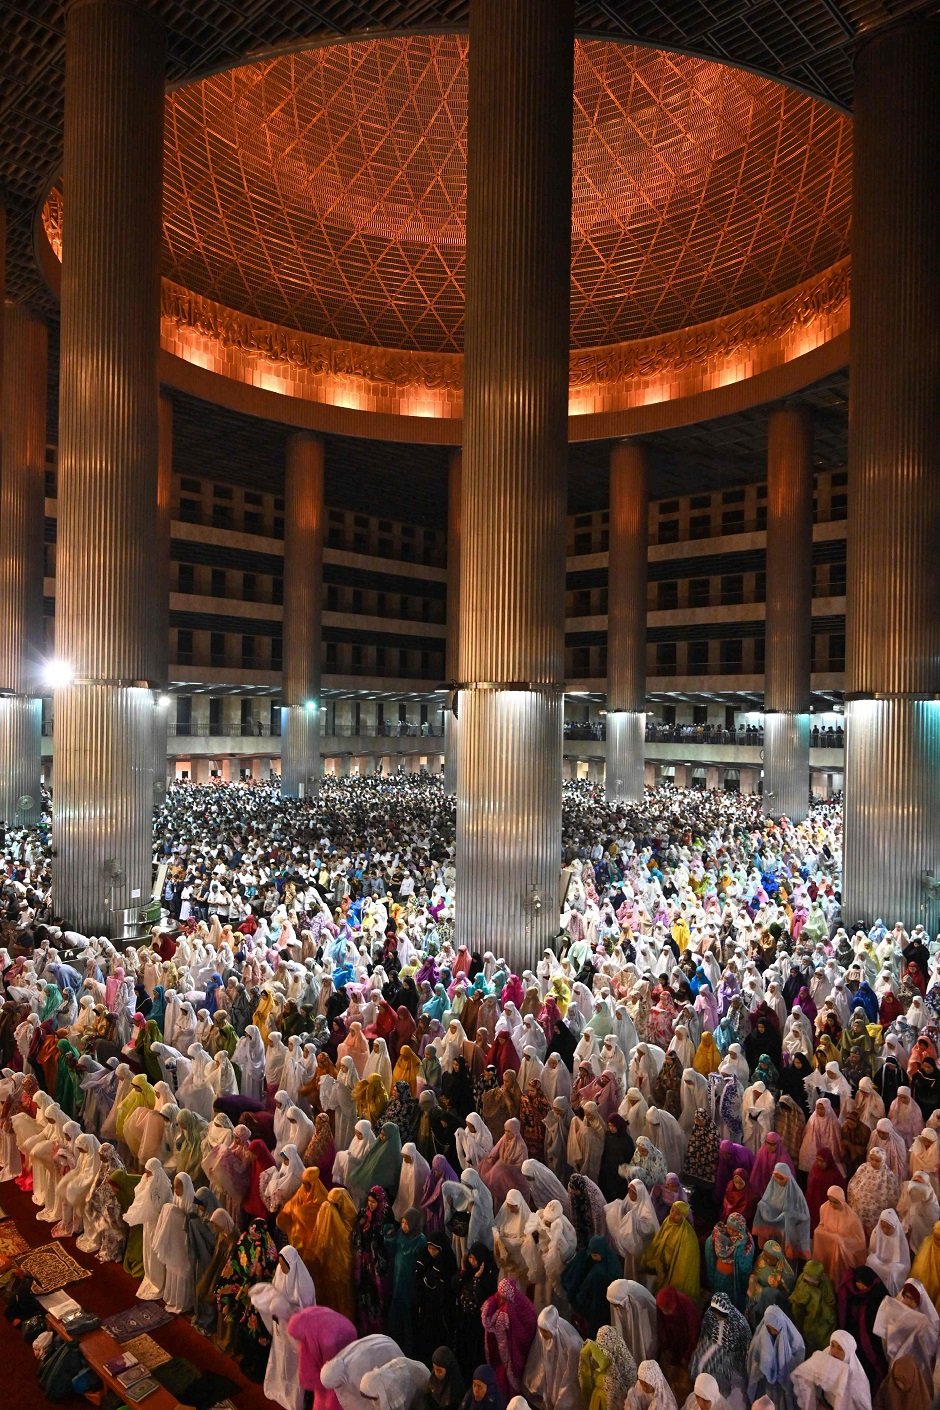 3.Muslim people pray on the first night of the holy month of Ramadan at the Istiqlal Grand Mosque in Jakarta, Indonesia. PHOTO: AFP